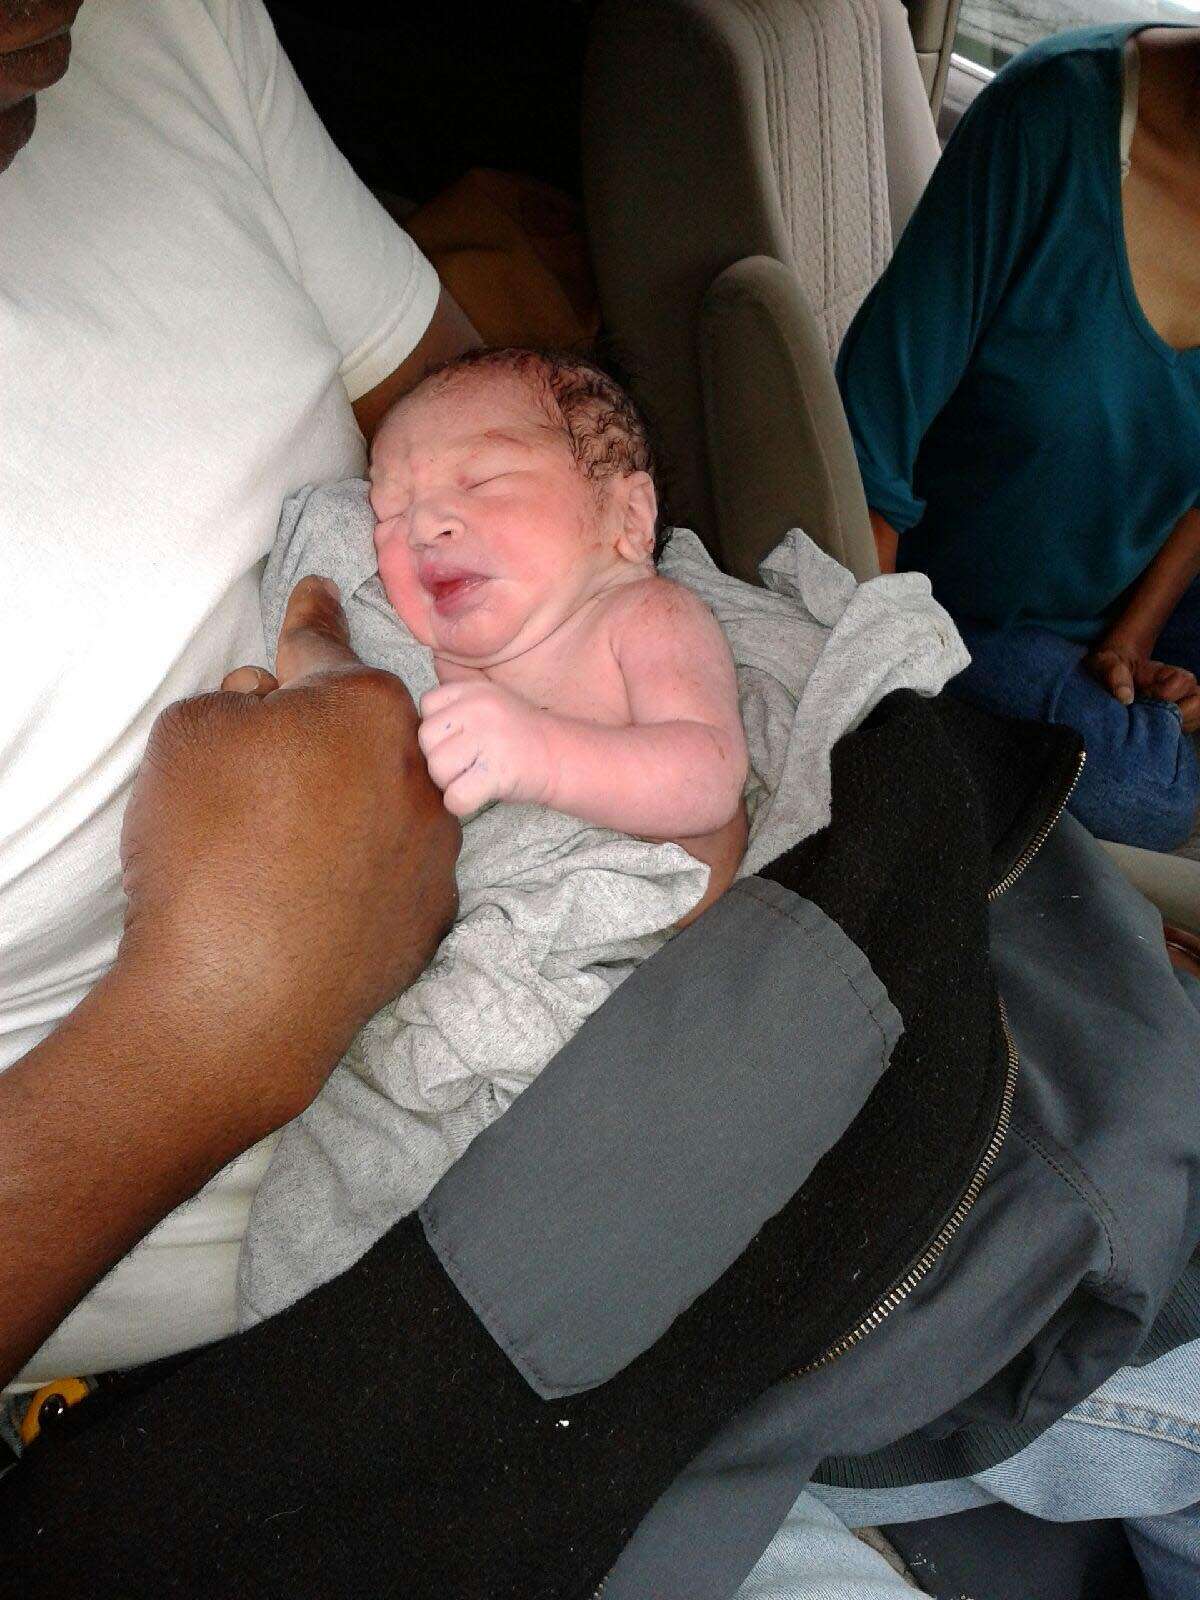 Photo taken by Ricky Ramirez of the baby boy found in a Dumpster at an apartment complex in southeast Houston on Tuesday, Feb 25, 2014.